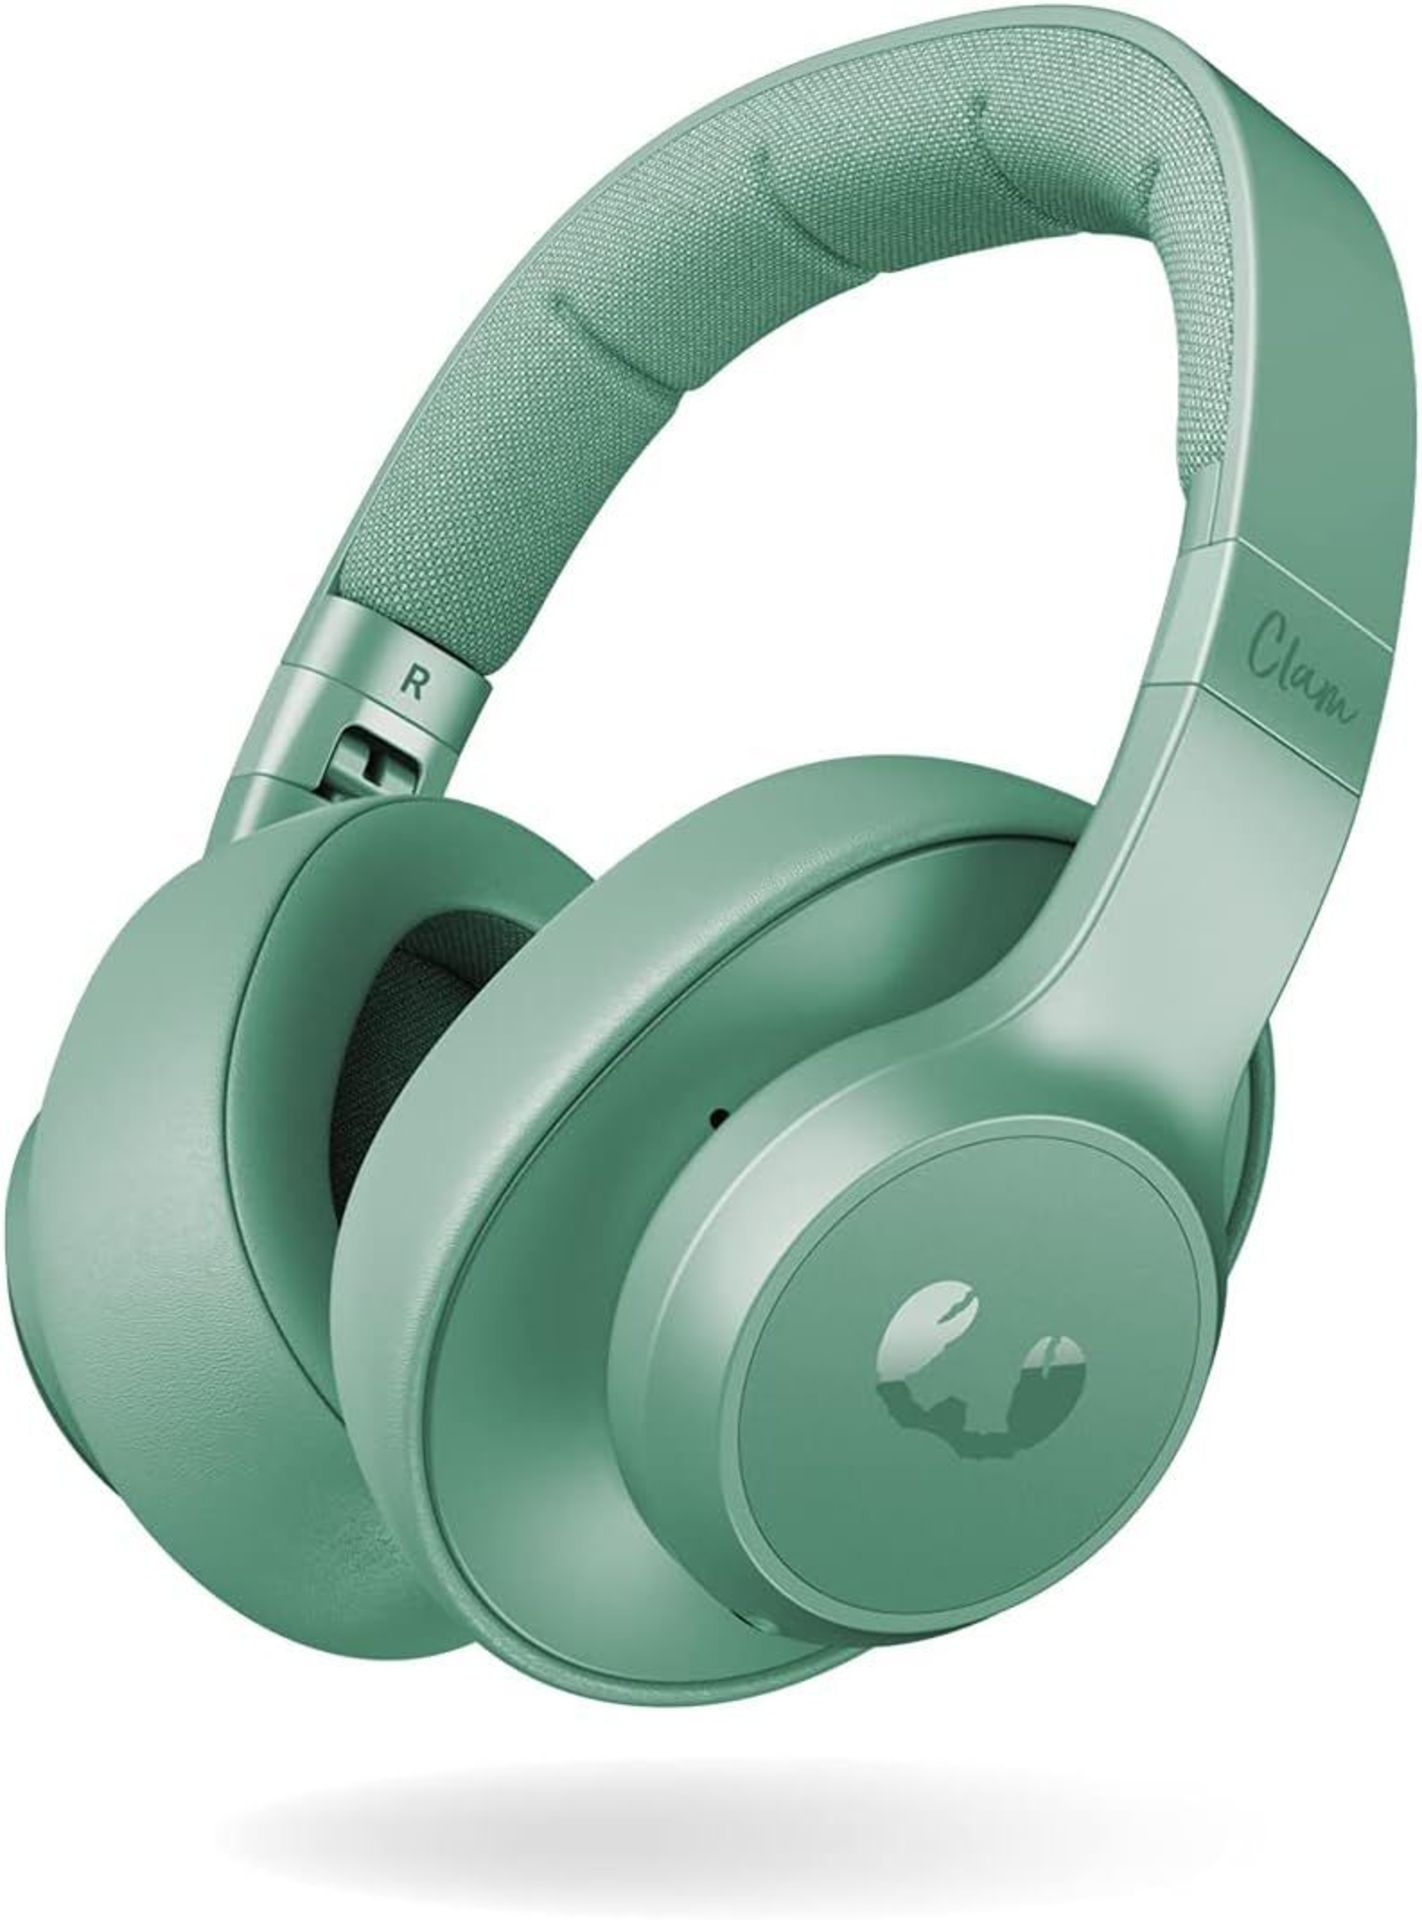 Fresh ’n Rebel Clam ANC Headphones Misty Mint |Over-ear Wireless Bluetooth Headphones with Active